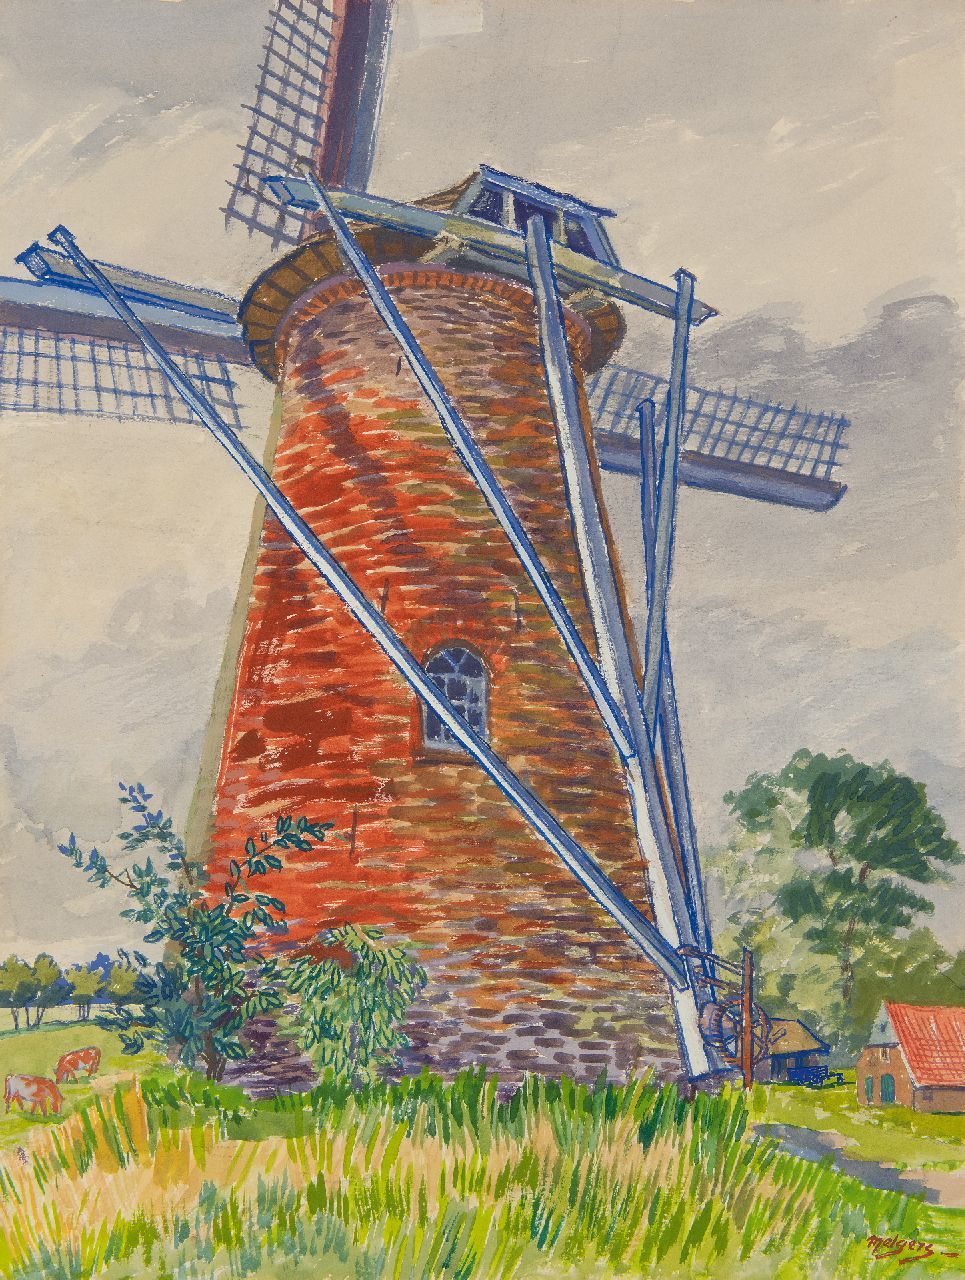 Melgers H.J.  | Hendrik Johan 'Henk' Melgers | Watercolours and drawings offered for sale | Windmill in Saasveld, gouache on paper 49.4 x 37.2 cm, signed l.r.